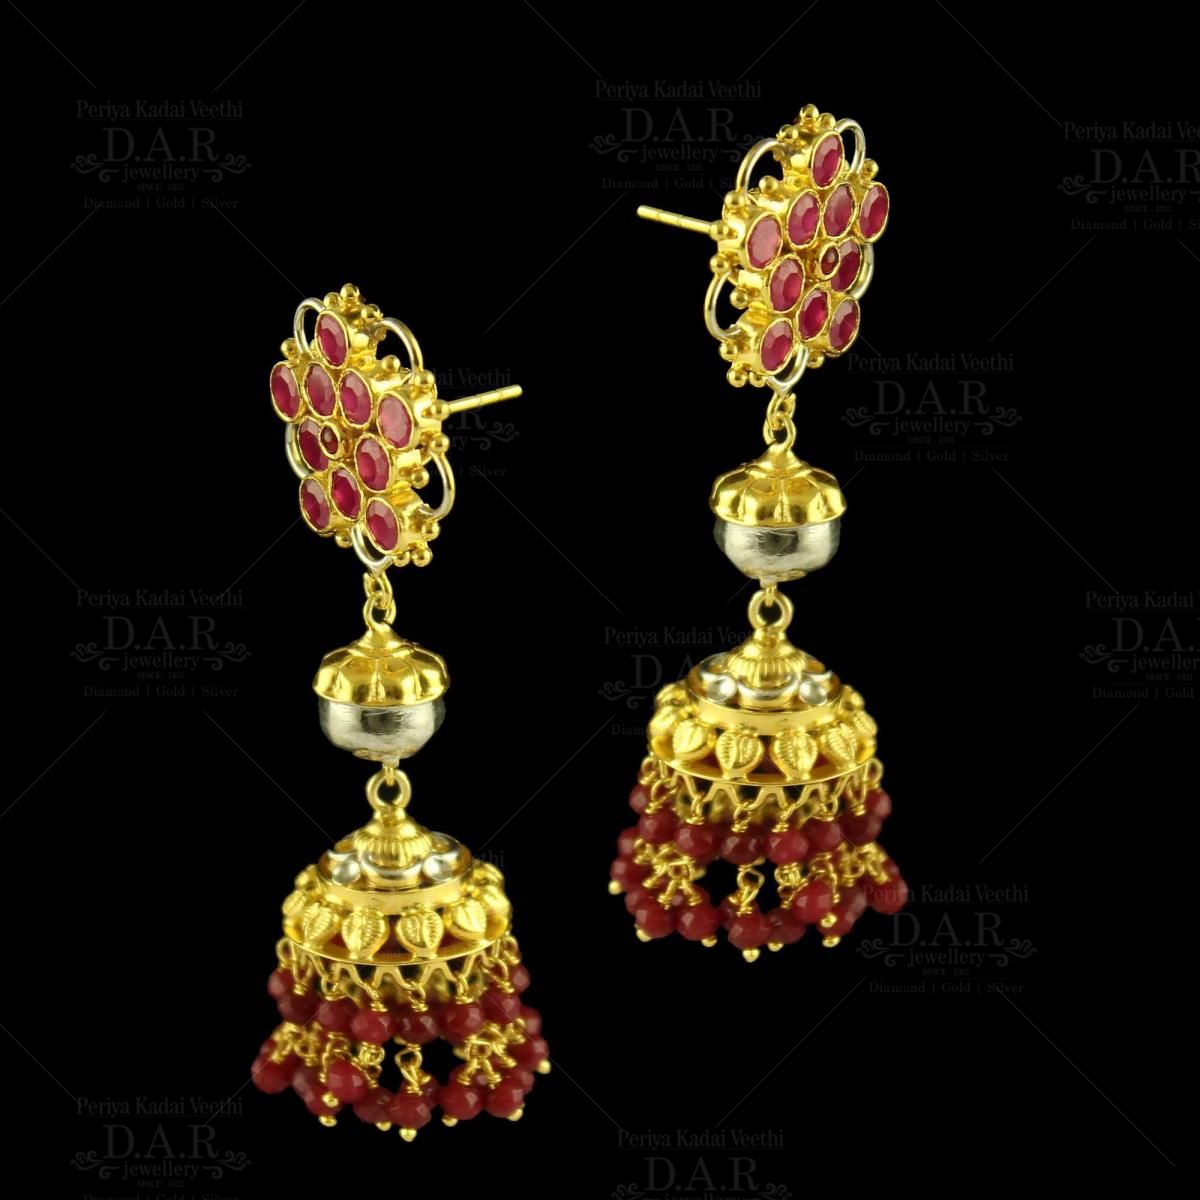 22k Thread Needle Earrings - ErFc25135 - 22k gold long chandelier earrings  designed exclusively in thread and a needle style(round tops comes